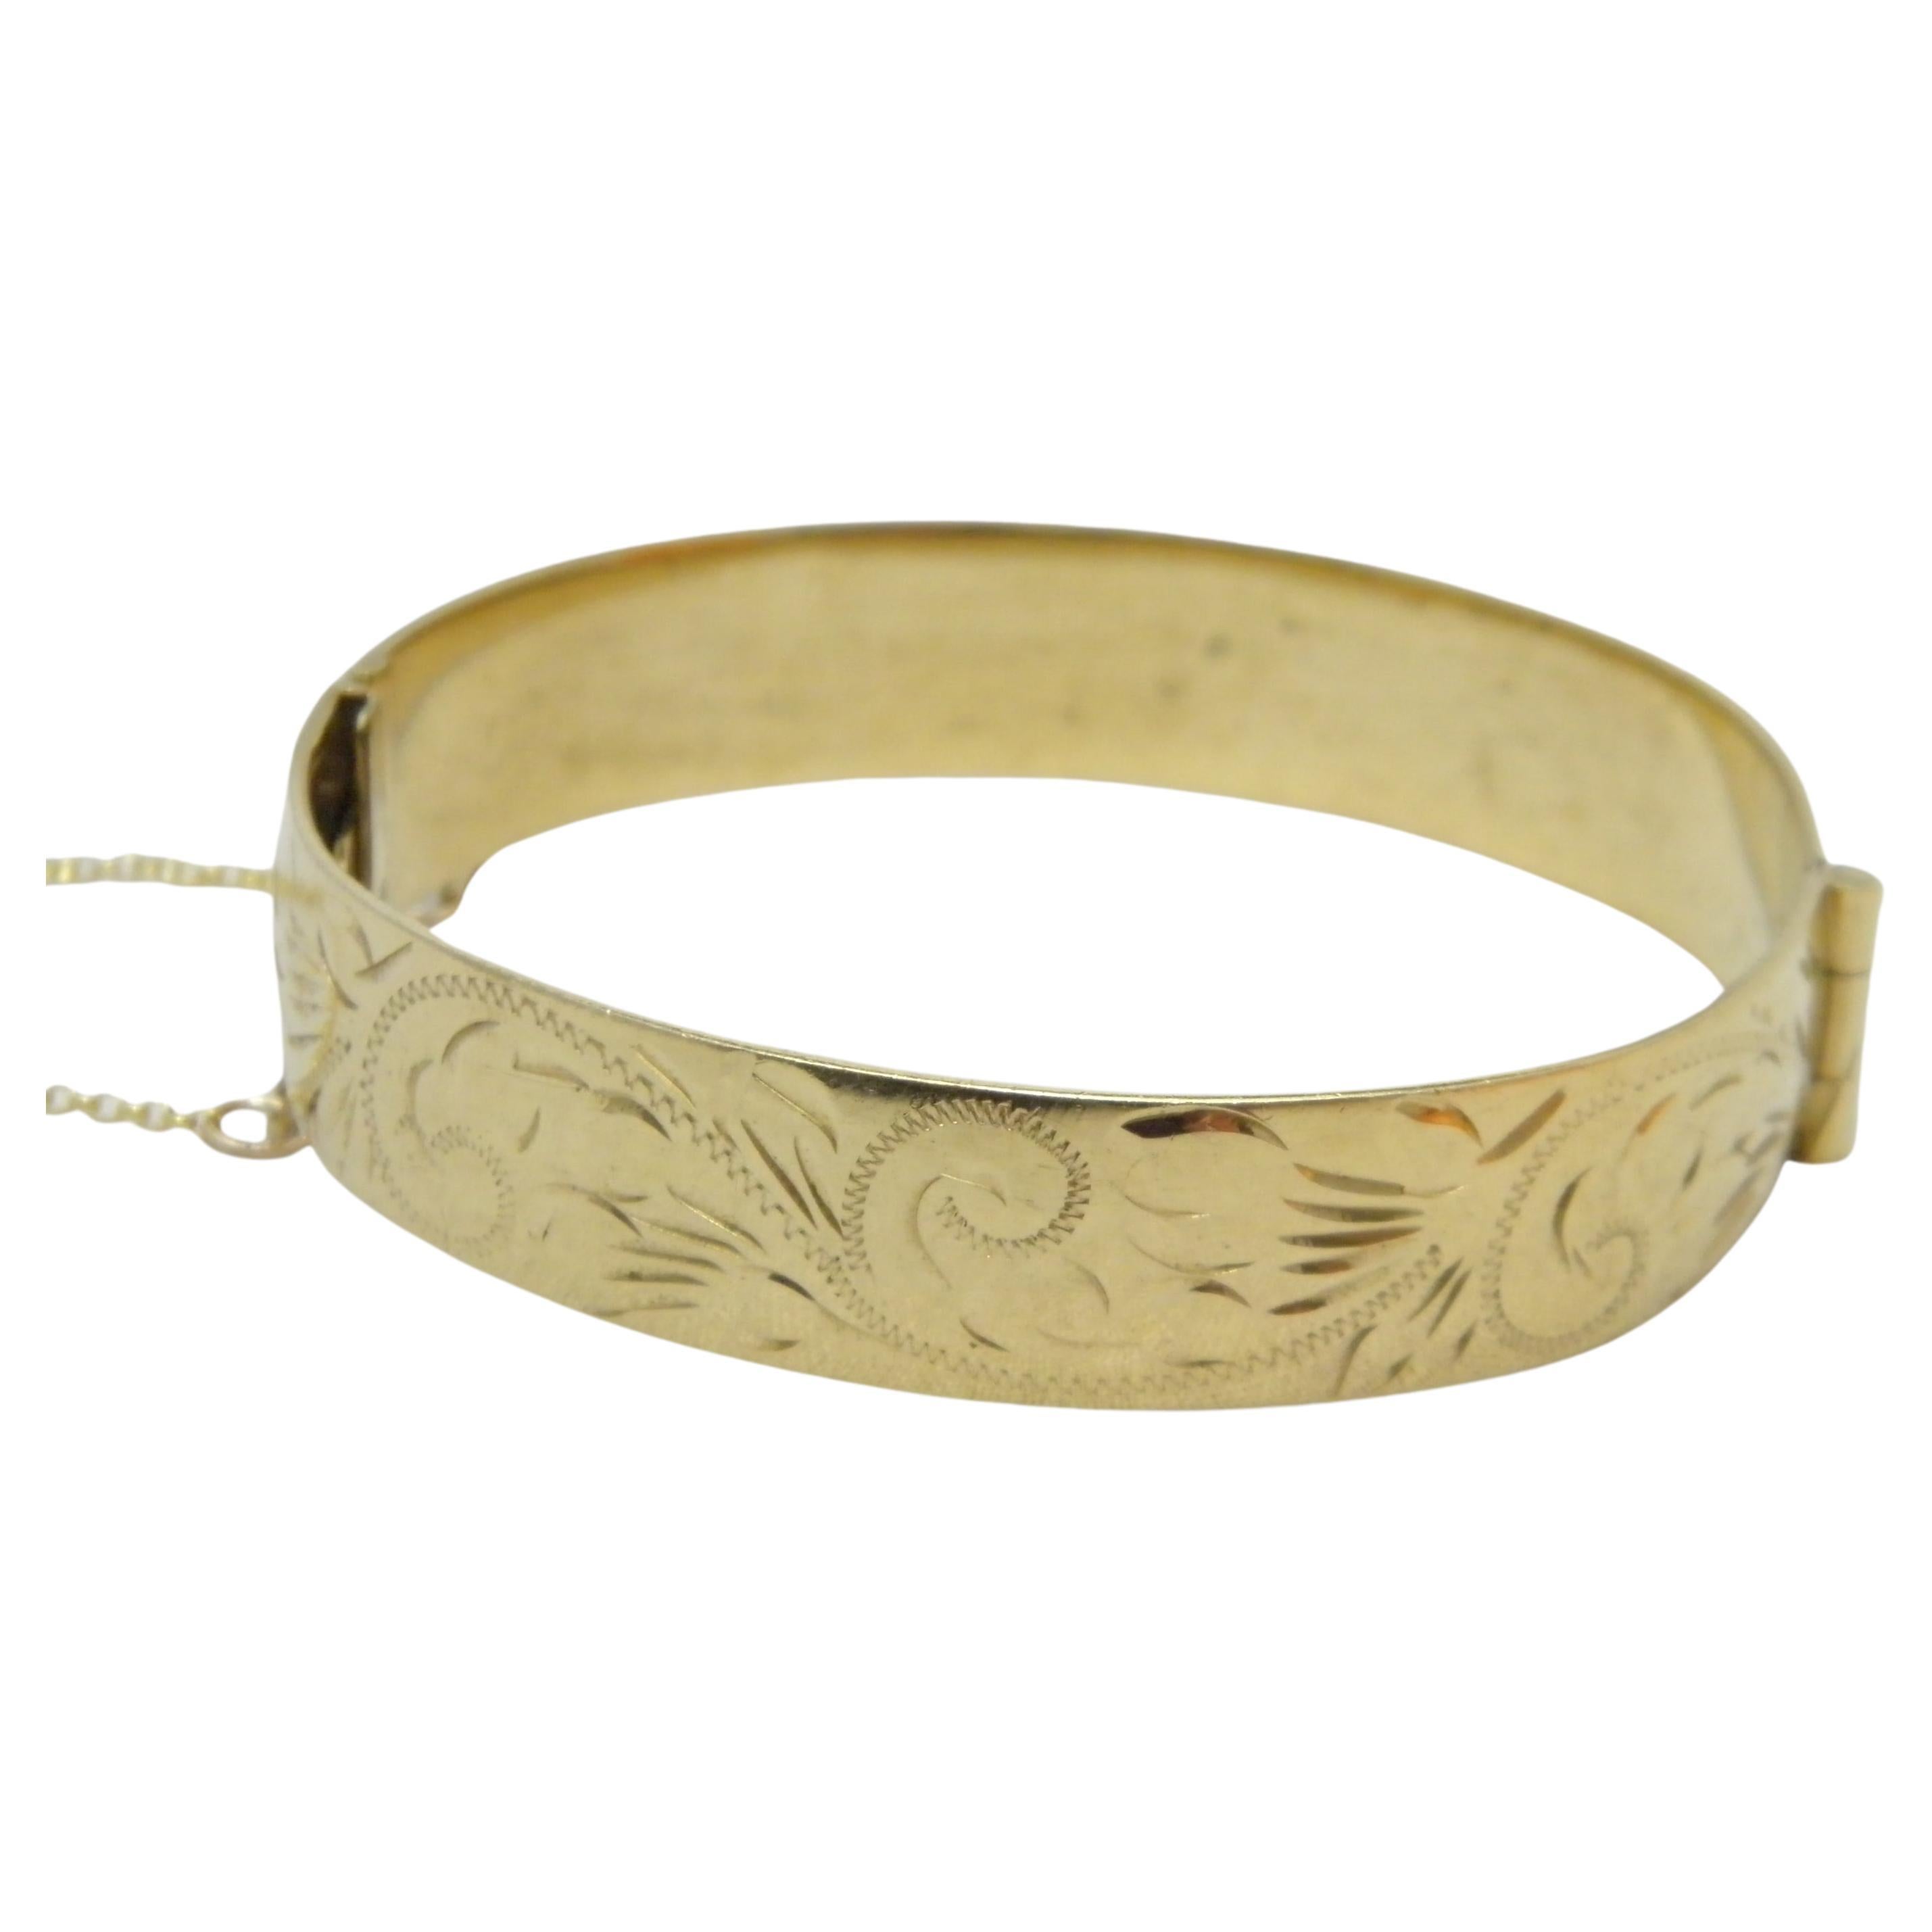 Bargain Vintage 9ct Gold 'Rolled' Floral Cuff Hinged Bracelet Bangle 375 Purity  For Sale